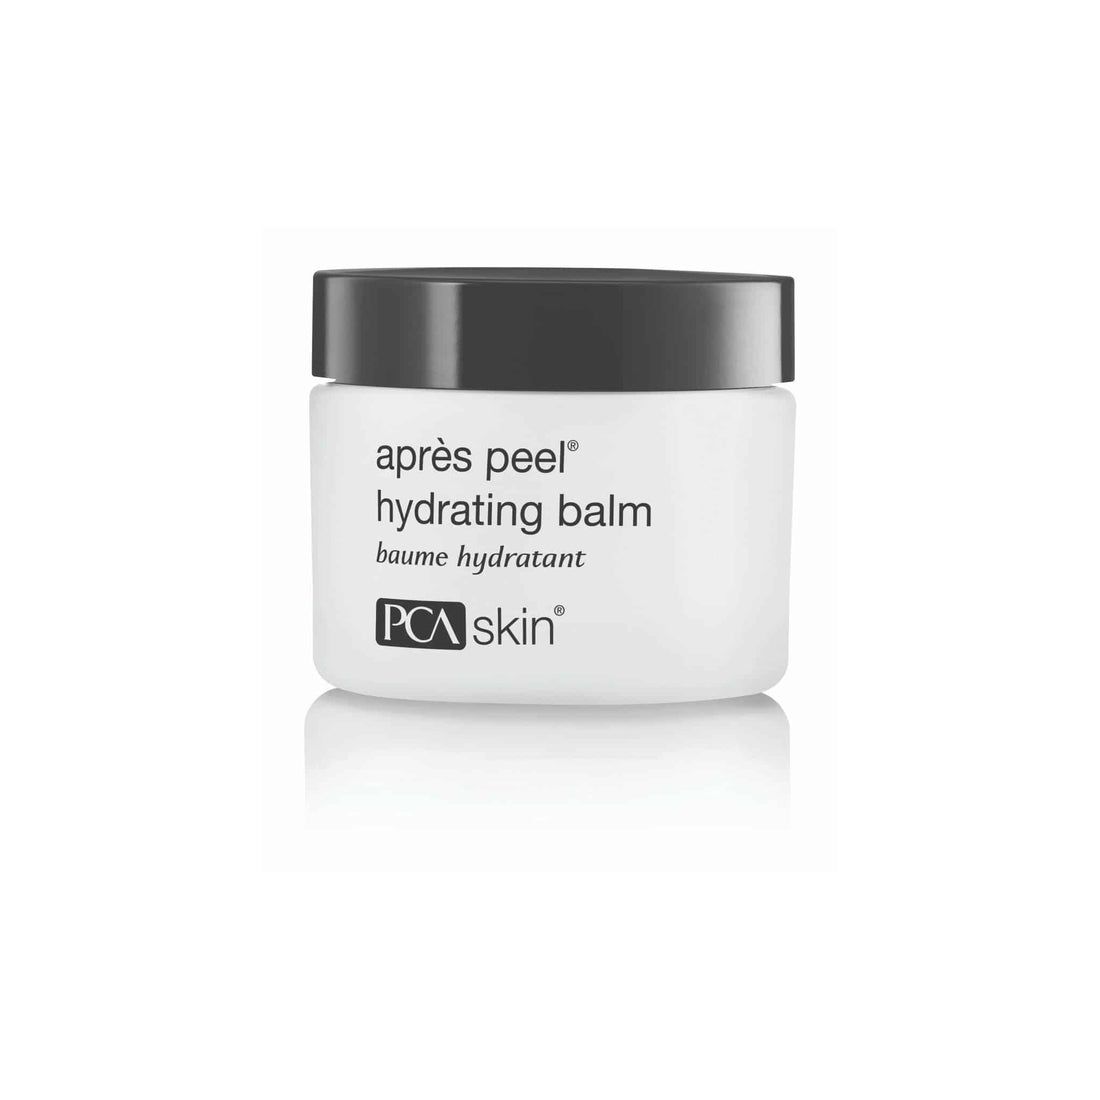 A white jar of Aprés Peel Hydrating Balm 48 g with a black lid. The label reads &quot;après peel hydrating balm, baume hydratant&quot; and &quot;PCA skin&quot; is marked in a black box at the bottom. Perfect for ageing skin, this luxurious moisturiser helps reduce fine lines and wrinkles. The jar is placed against a white background.